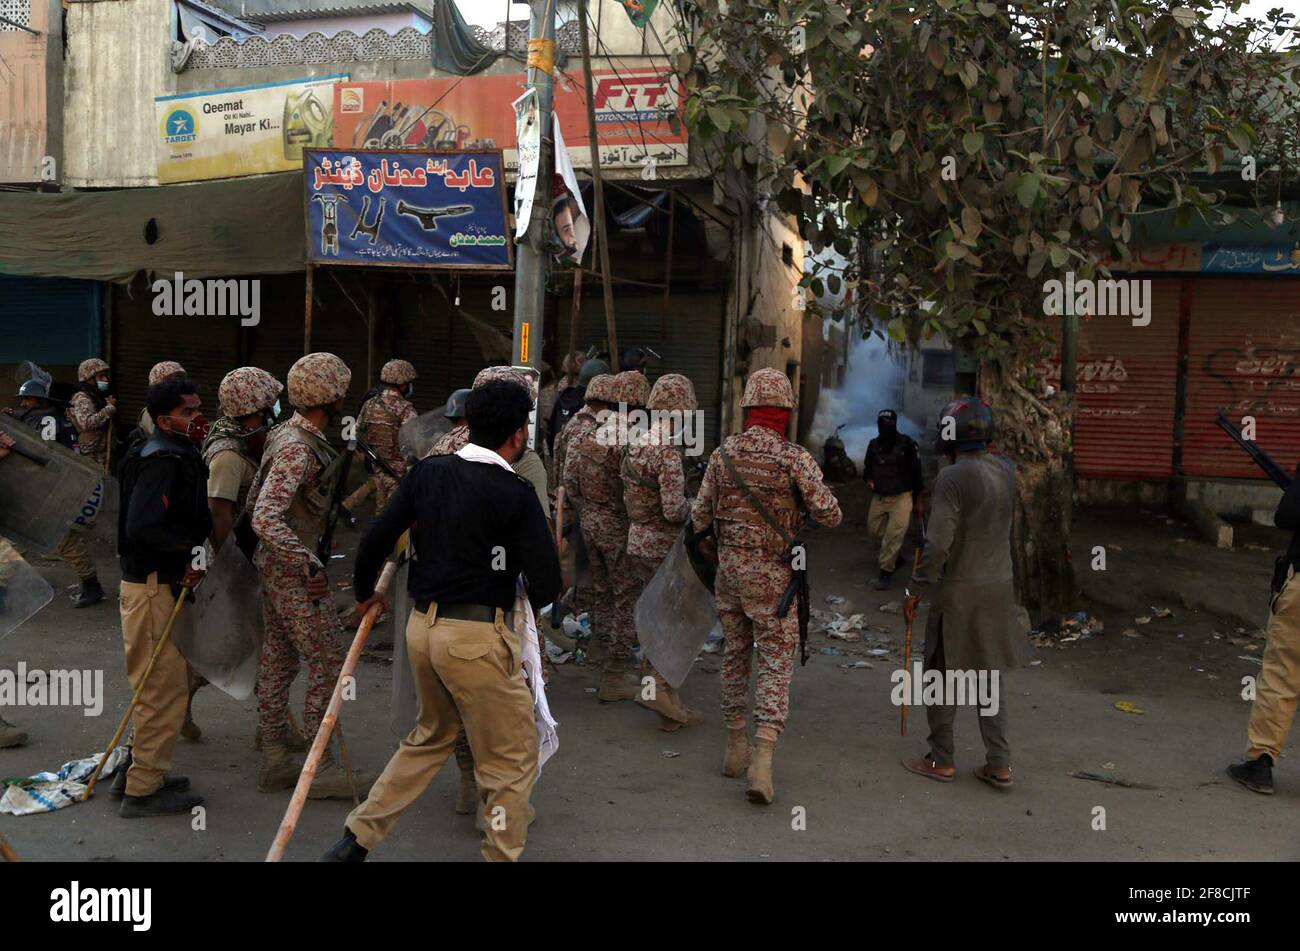 Police officials restore baton charge and fired tear gas shells to repel protesters during protest demonstration of Tehreek-e-Labbaik (TLP) against arrested of Saad Hussain Rizvi, Chief of Tehreek-e-Labbaik Pakistan (TLP) son of late cleric Khadim Hussain Rizvi, at Baldia Town in Karachi on Tuesday, April 13, 2021. Stock Photo